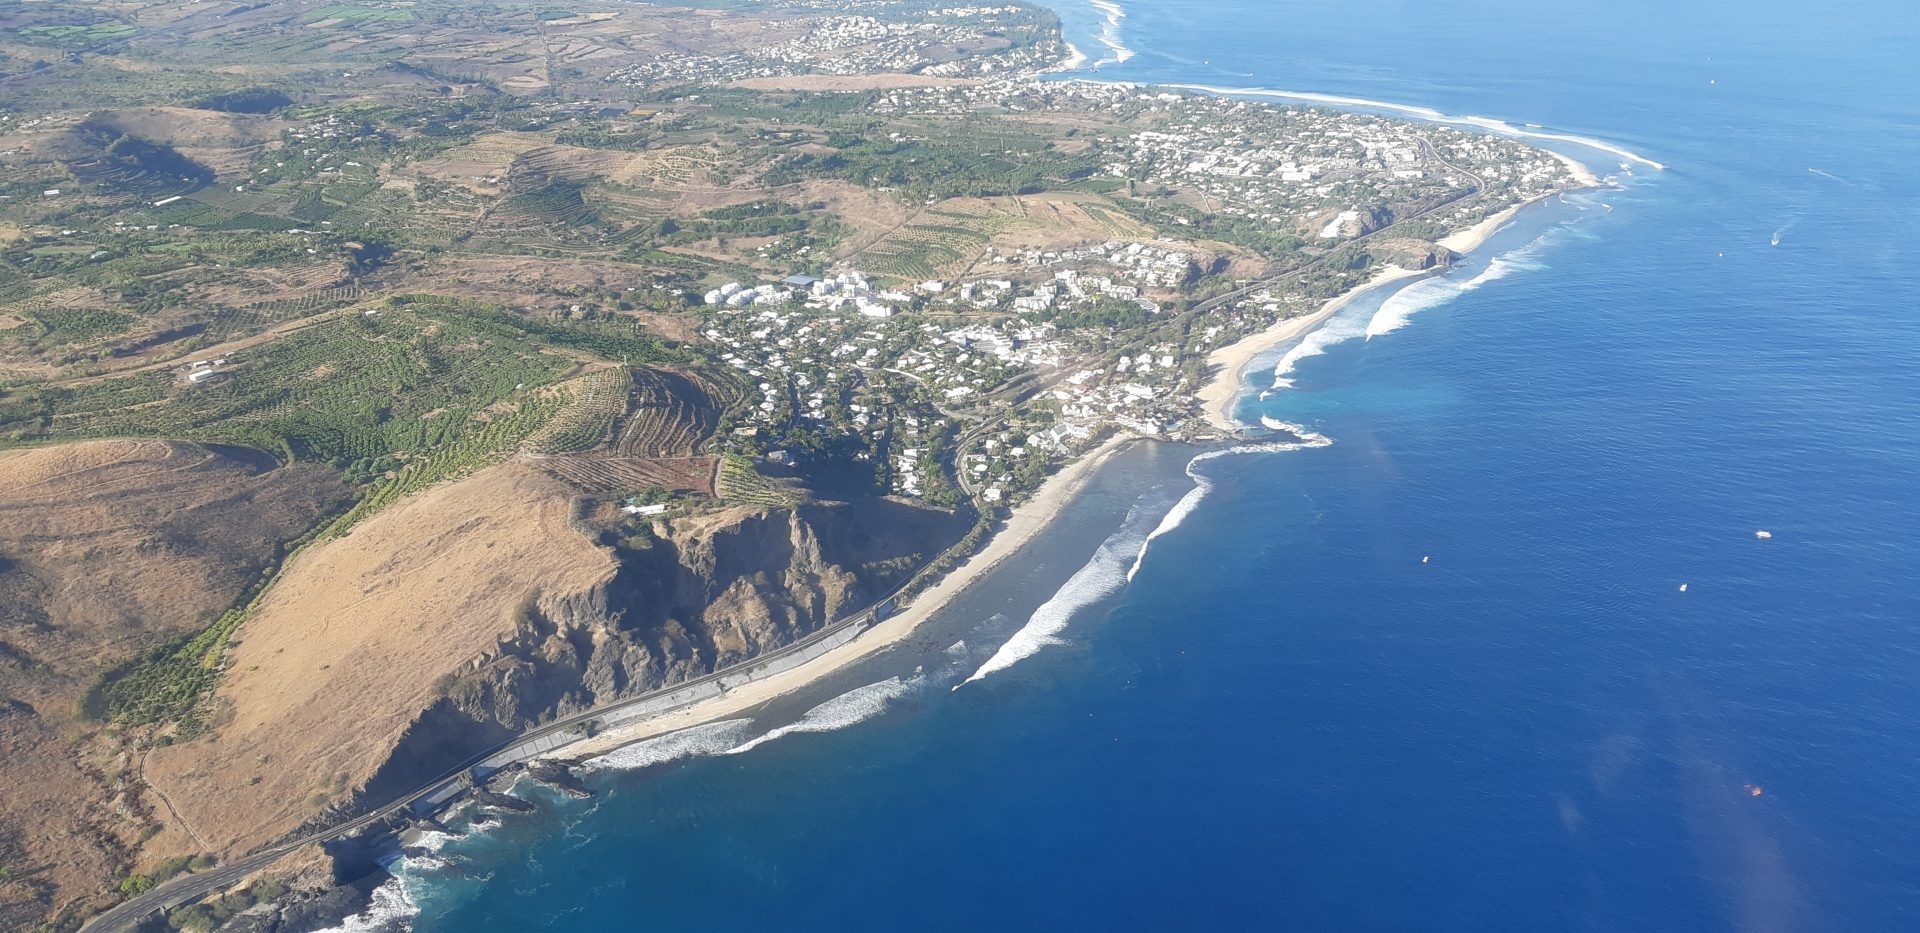 Read more about the article A Bird’s Eye View of Reunion Island